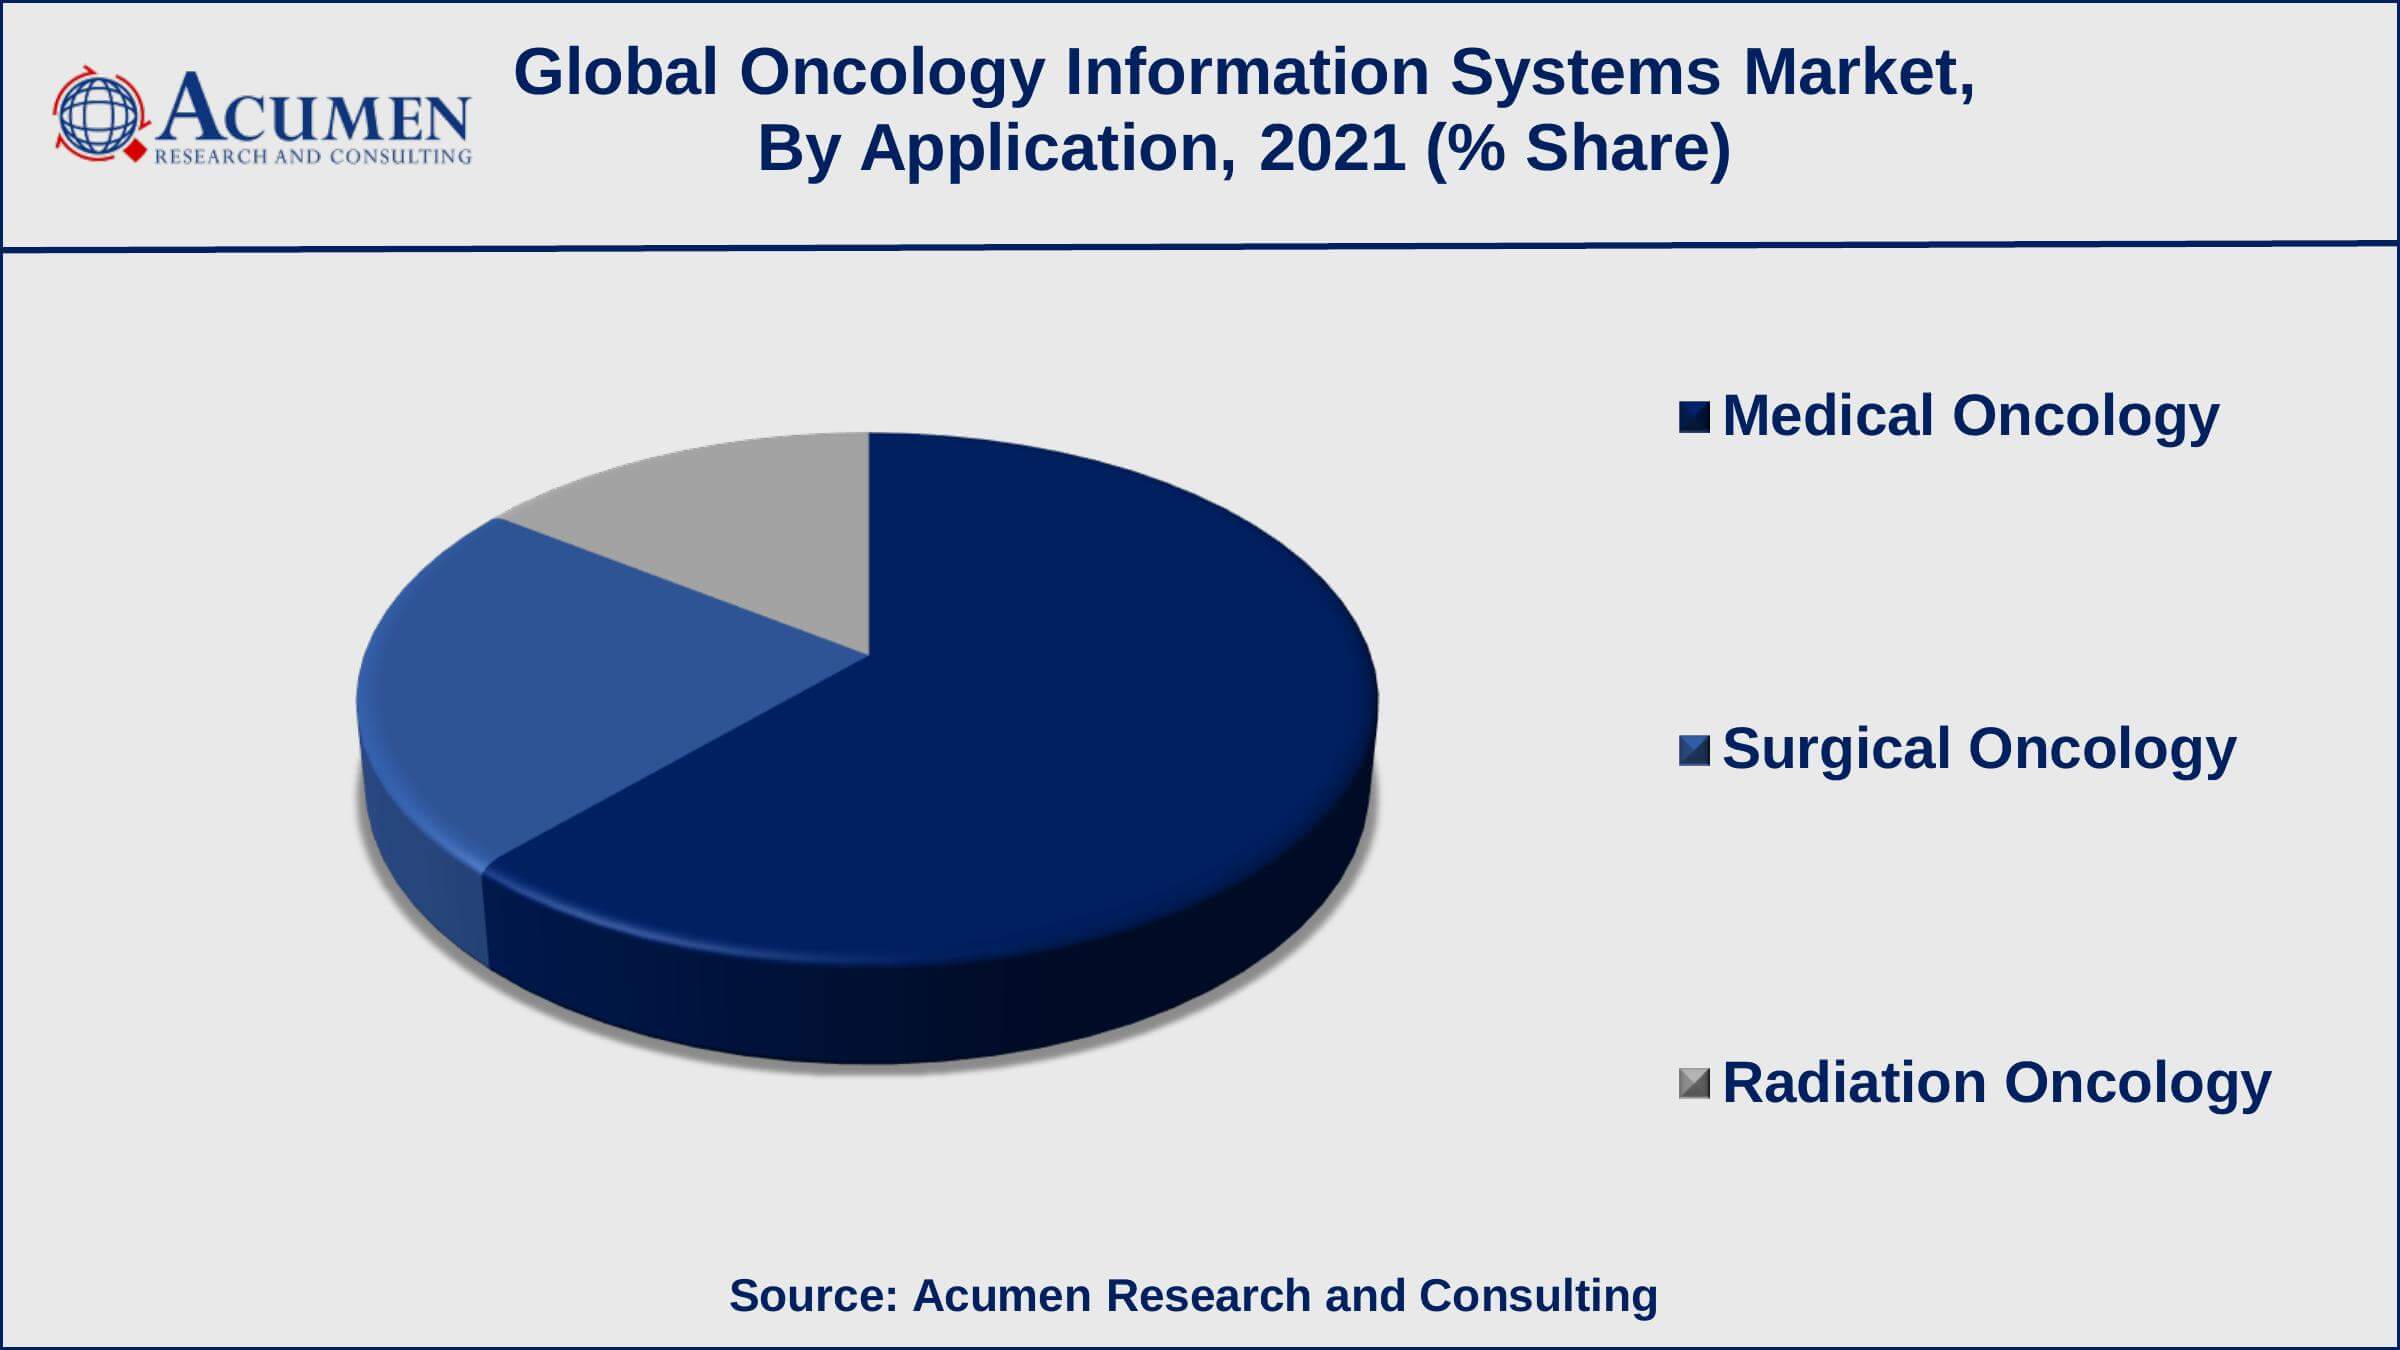 Among applications, medical oncology generated shares of over 62% in 2021